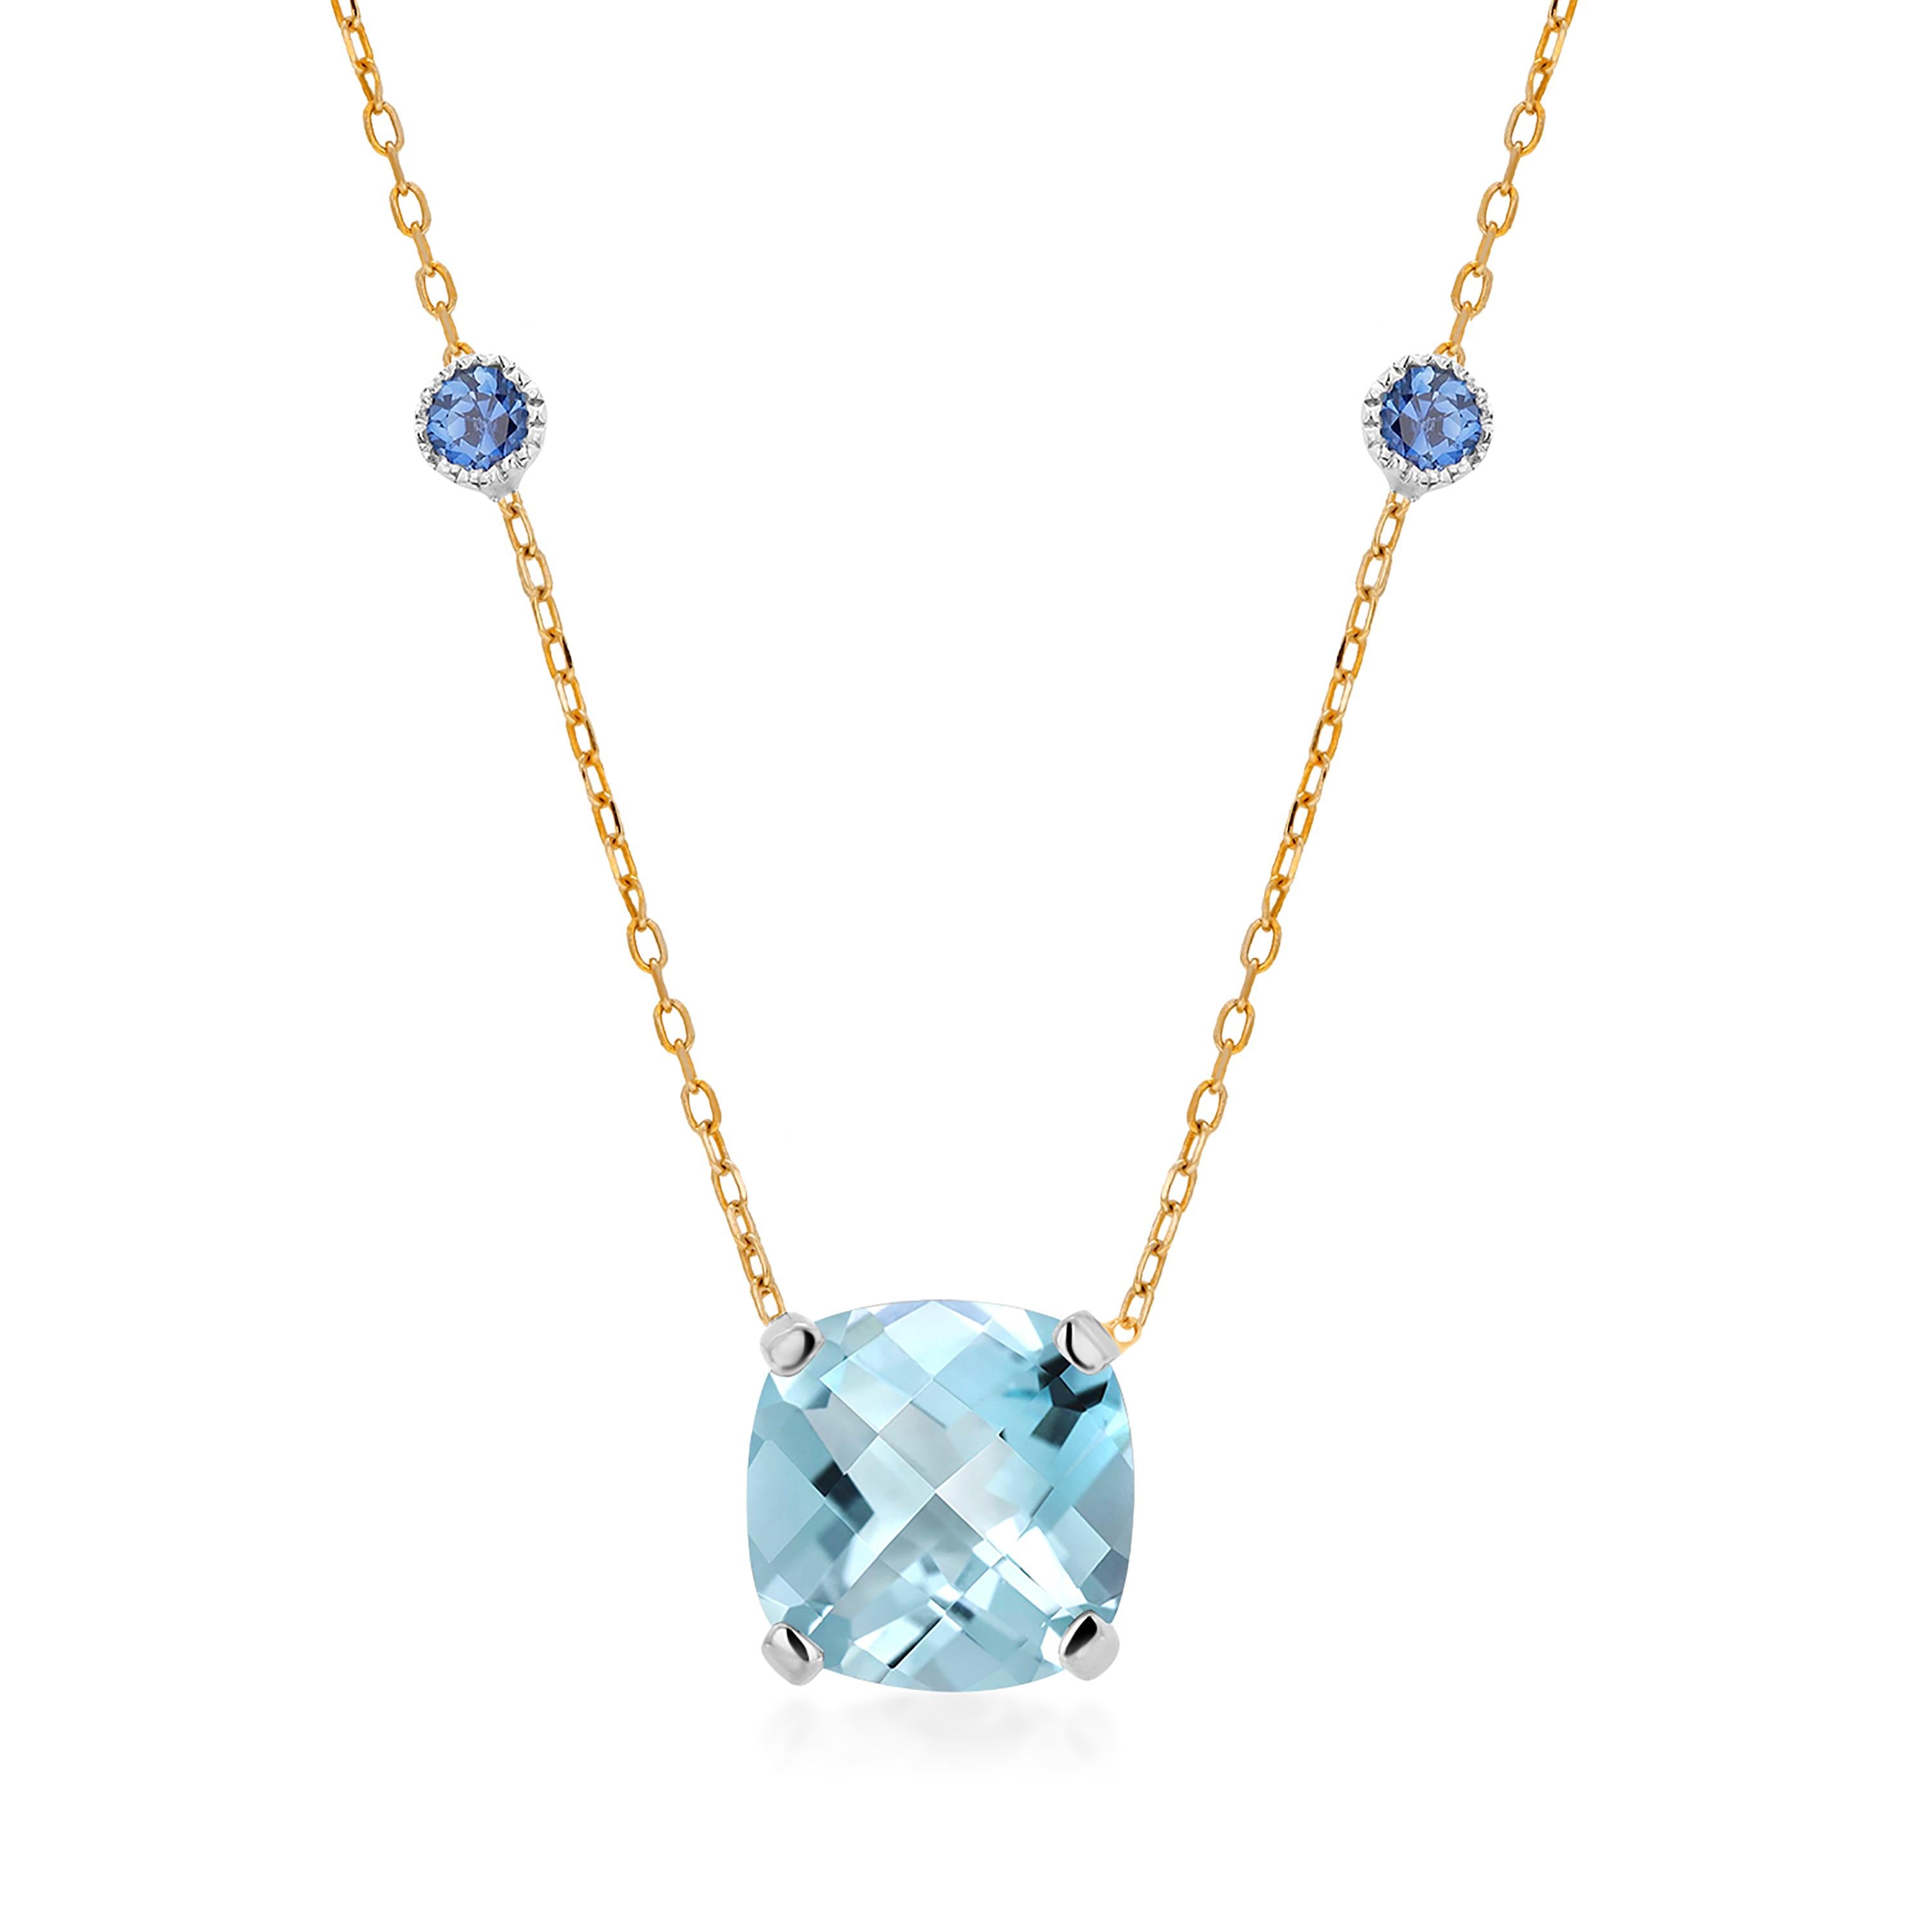 Modern Cushion Shaped Aquamarine and Sapphire White and Yellow Gold Pendant Necklace